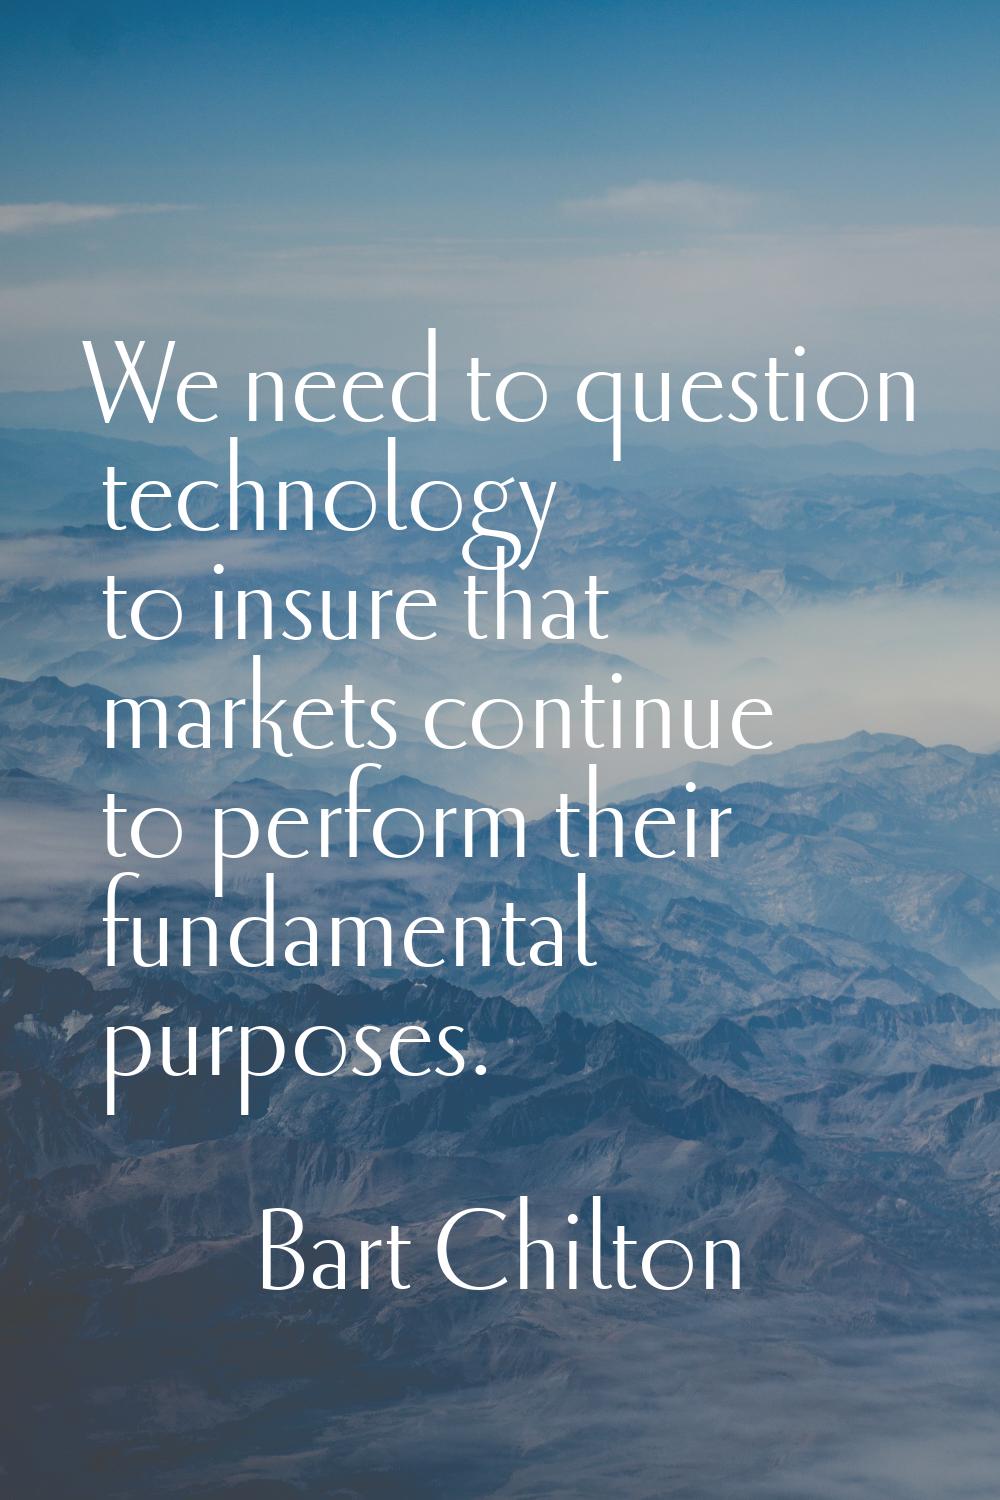 We need to question technology to insure that markets continue to perform their fundamental purpose